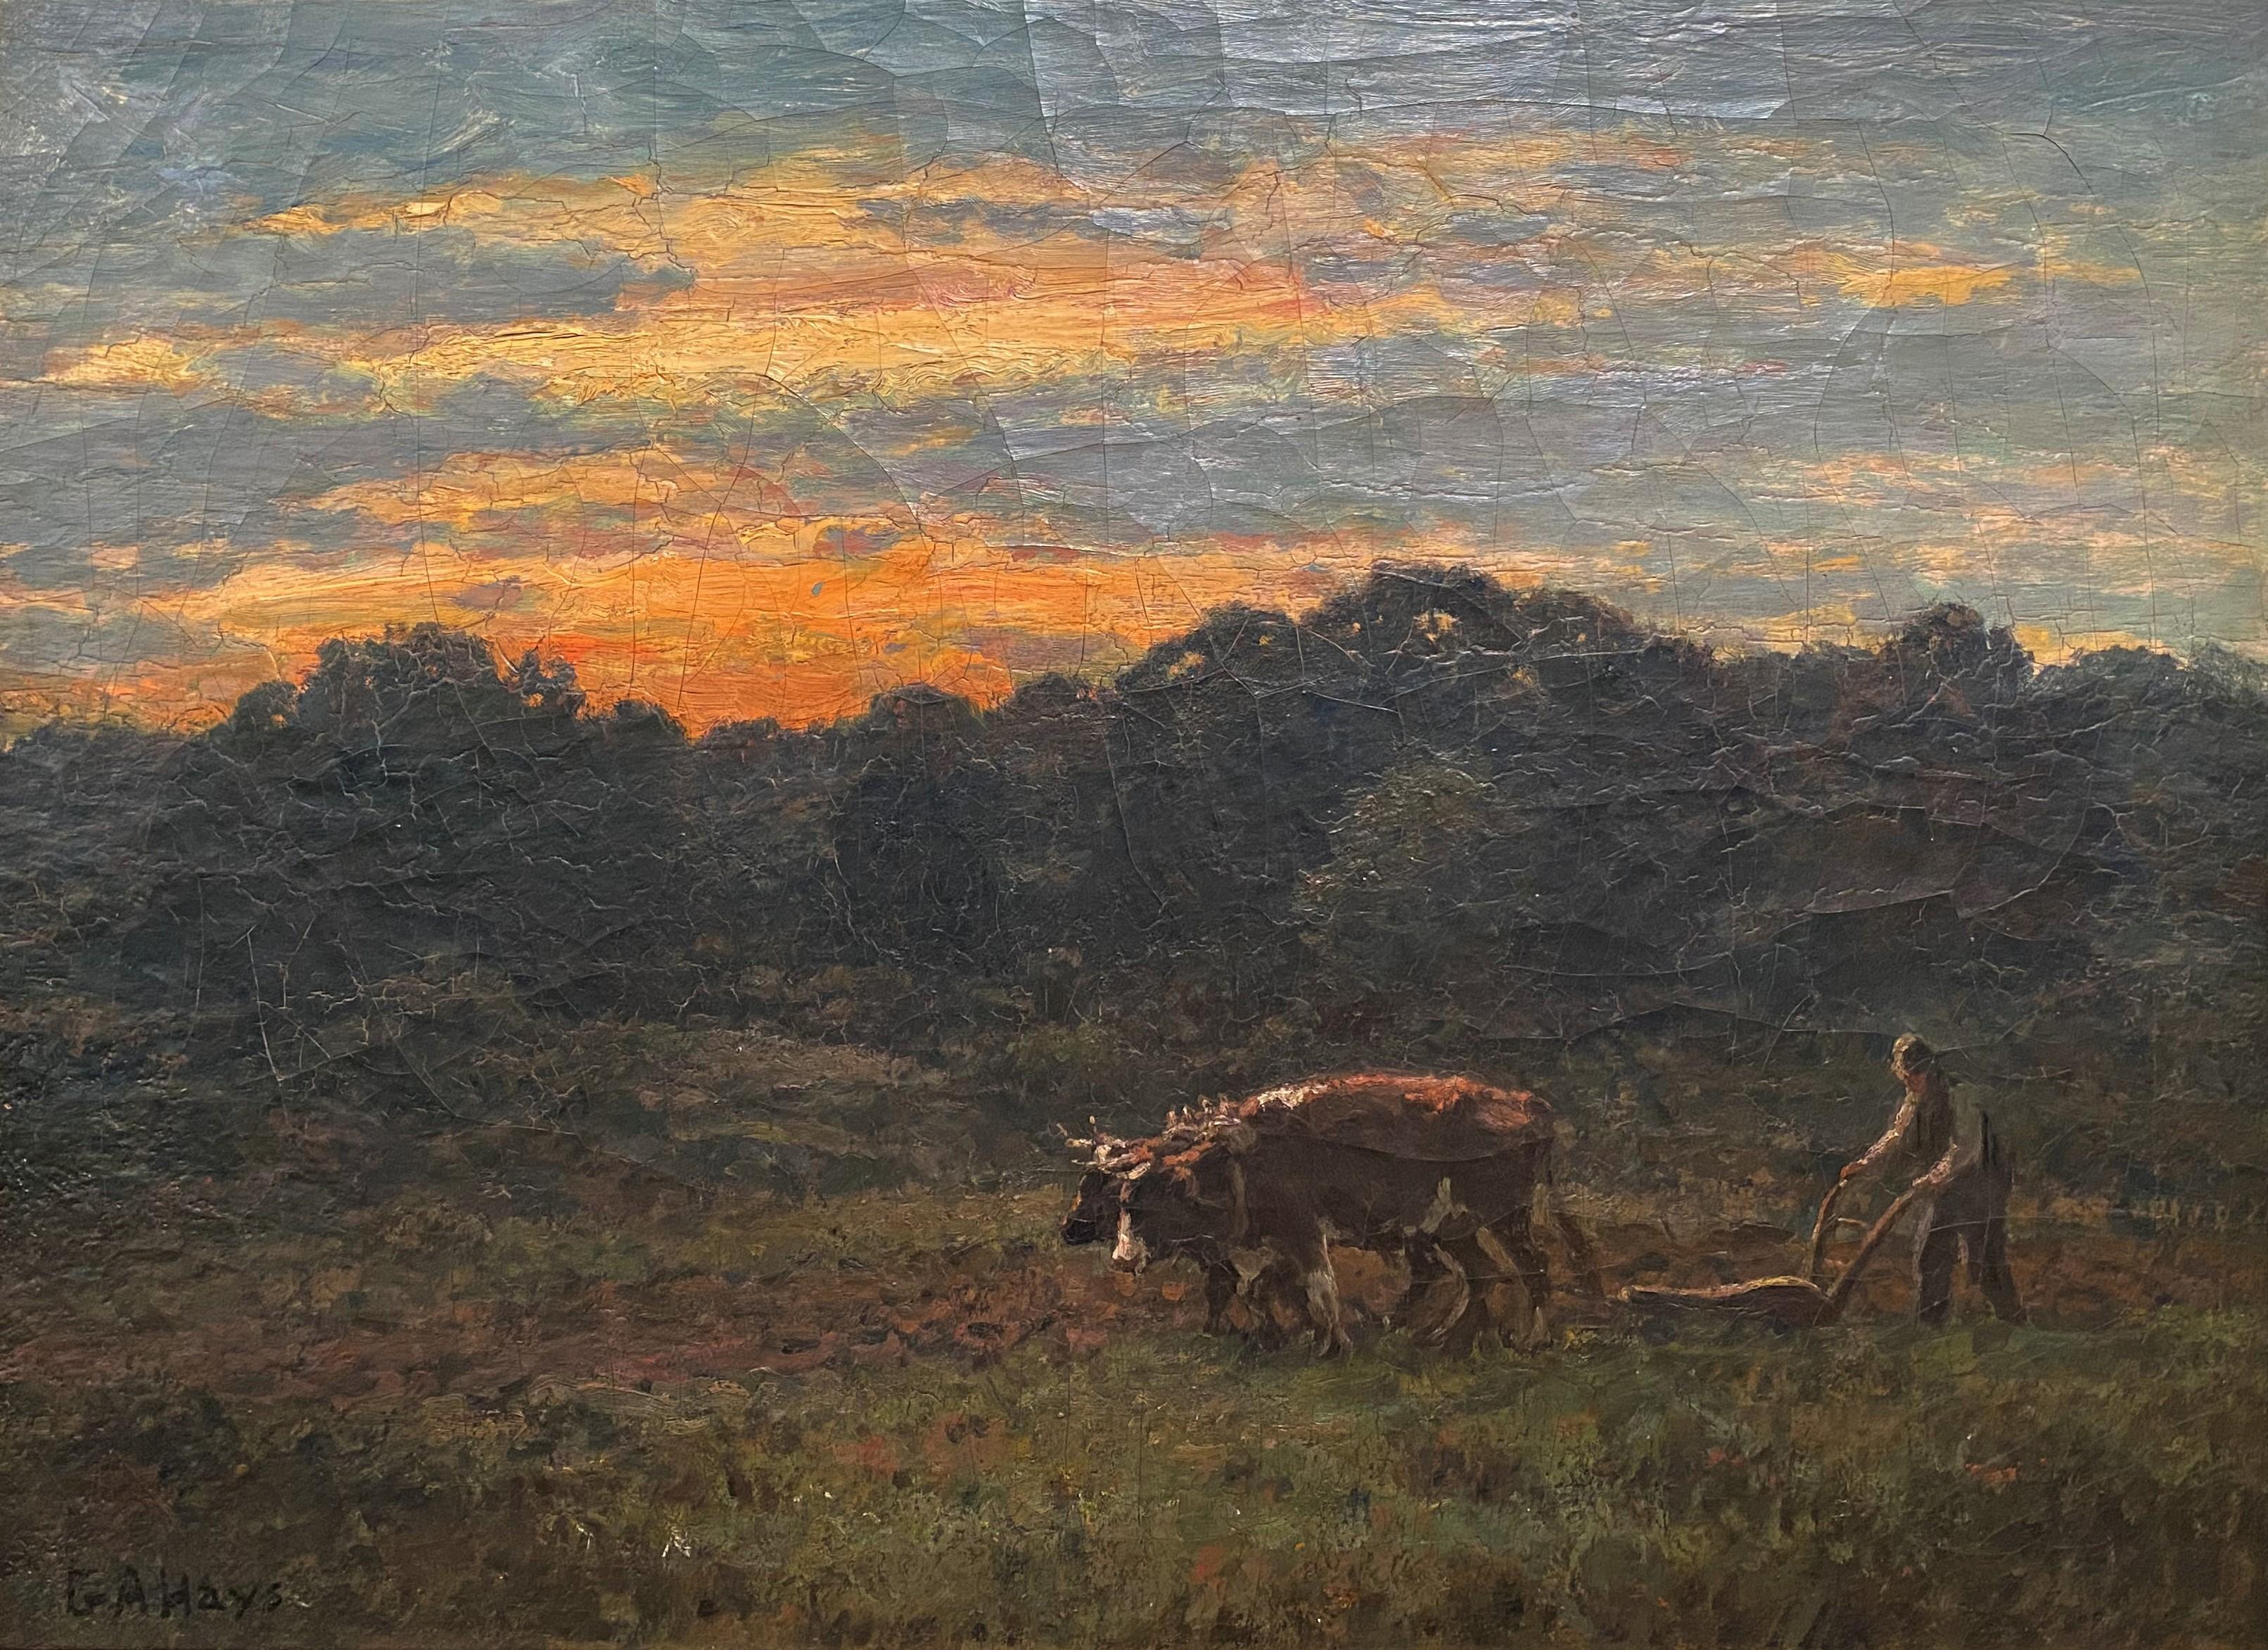 Ploughin at Dusk - Painting by George Arthur Hays